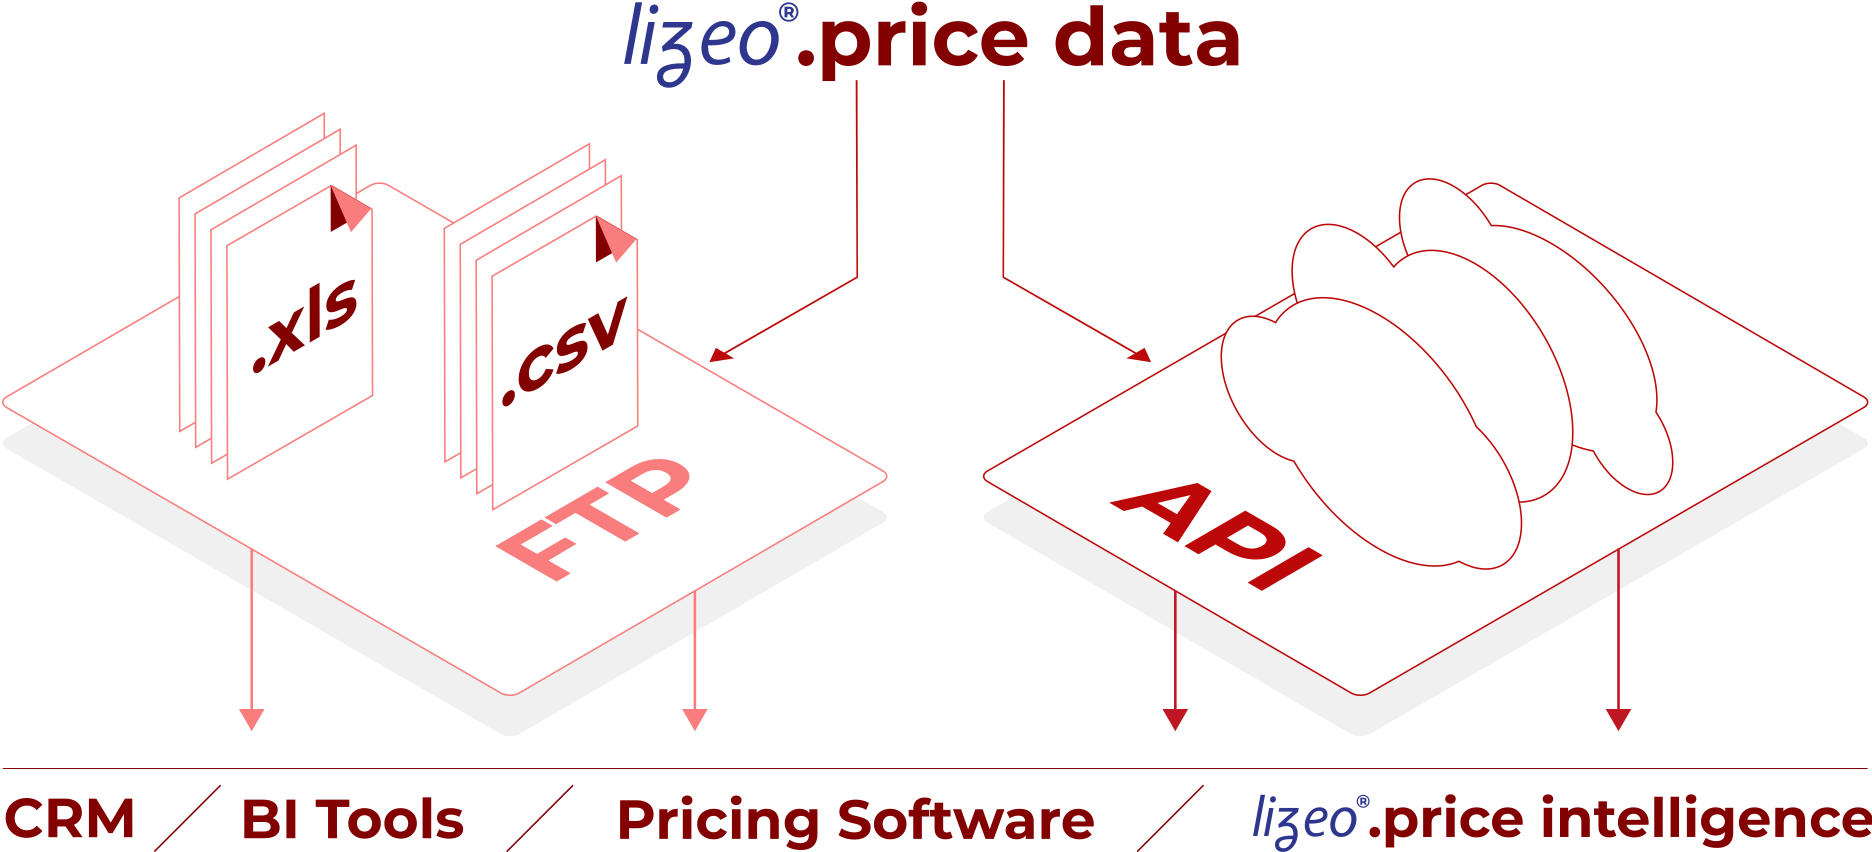 Diagram showing how Lizeo Price Data feeds a multitude of business tools